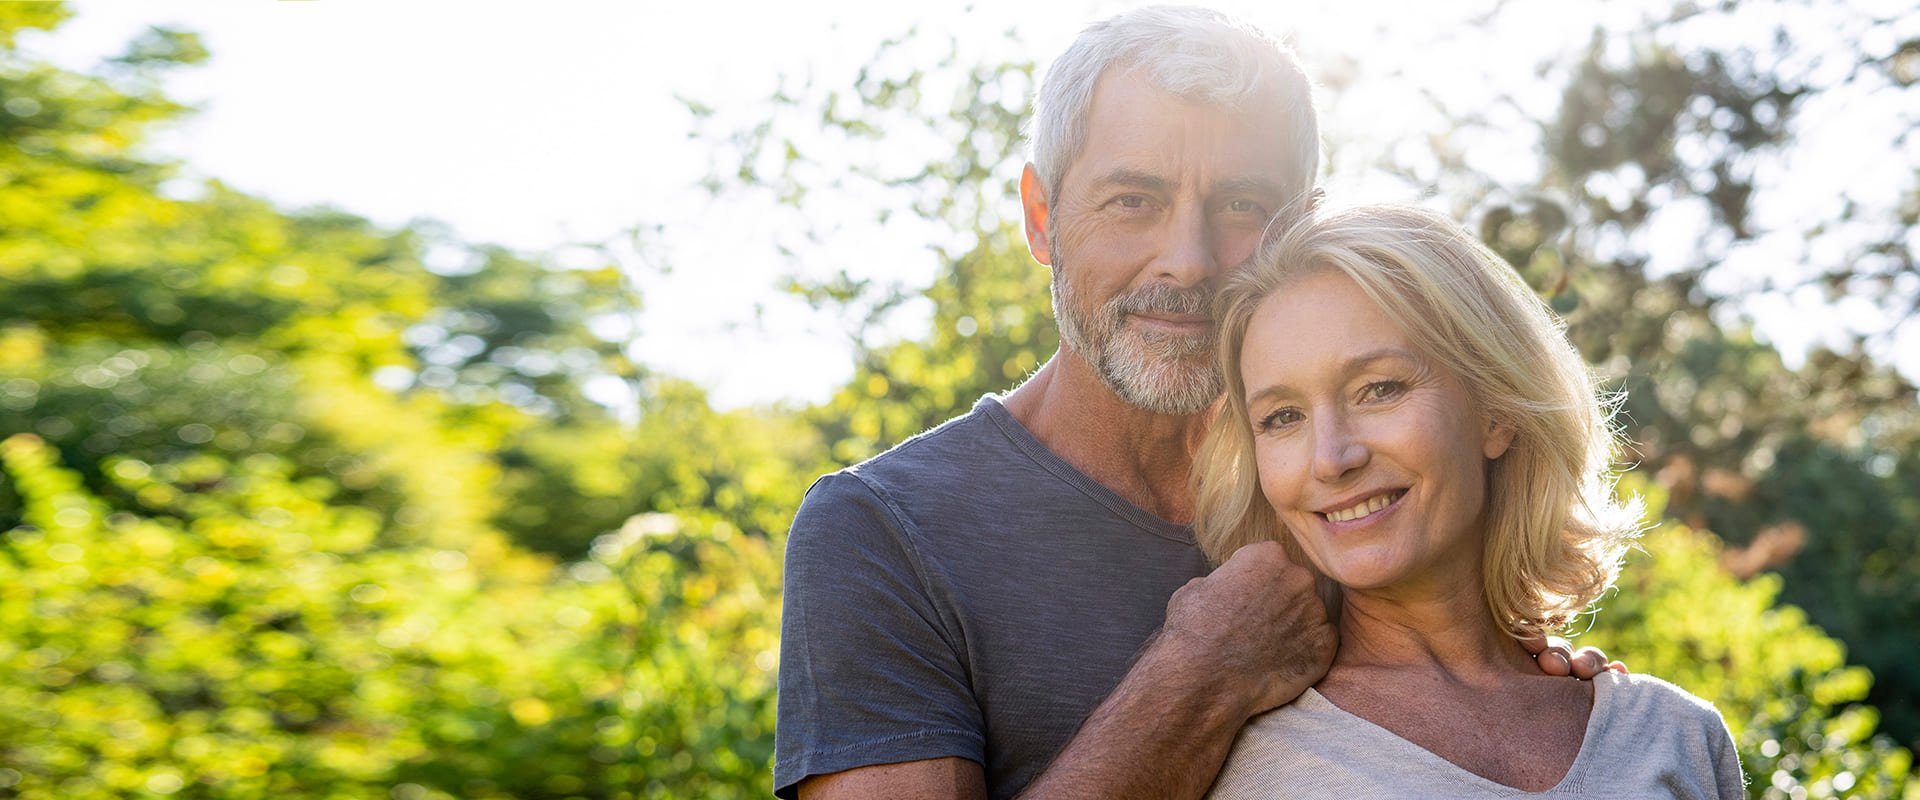 Dating over 60s symbolized by a couple smiling into the camera